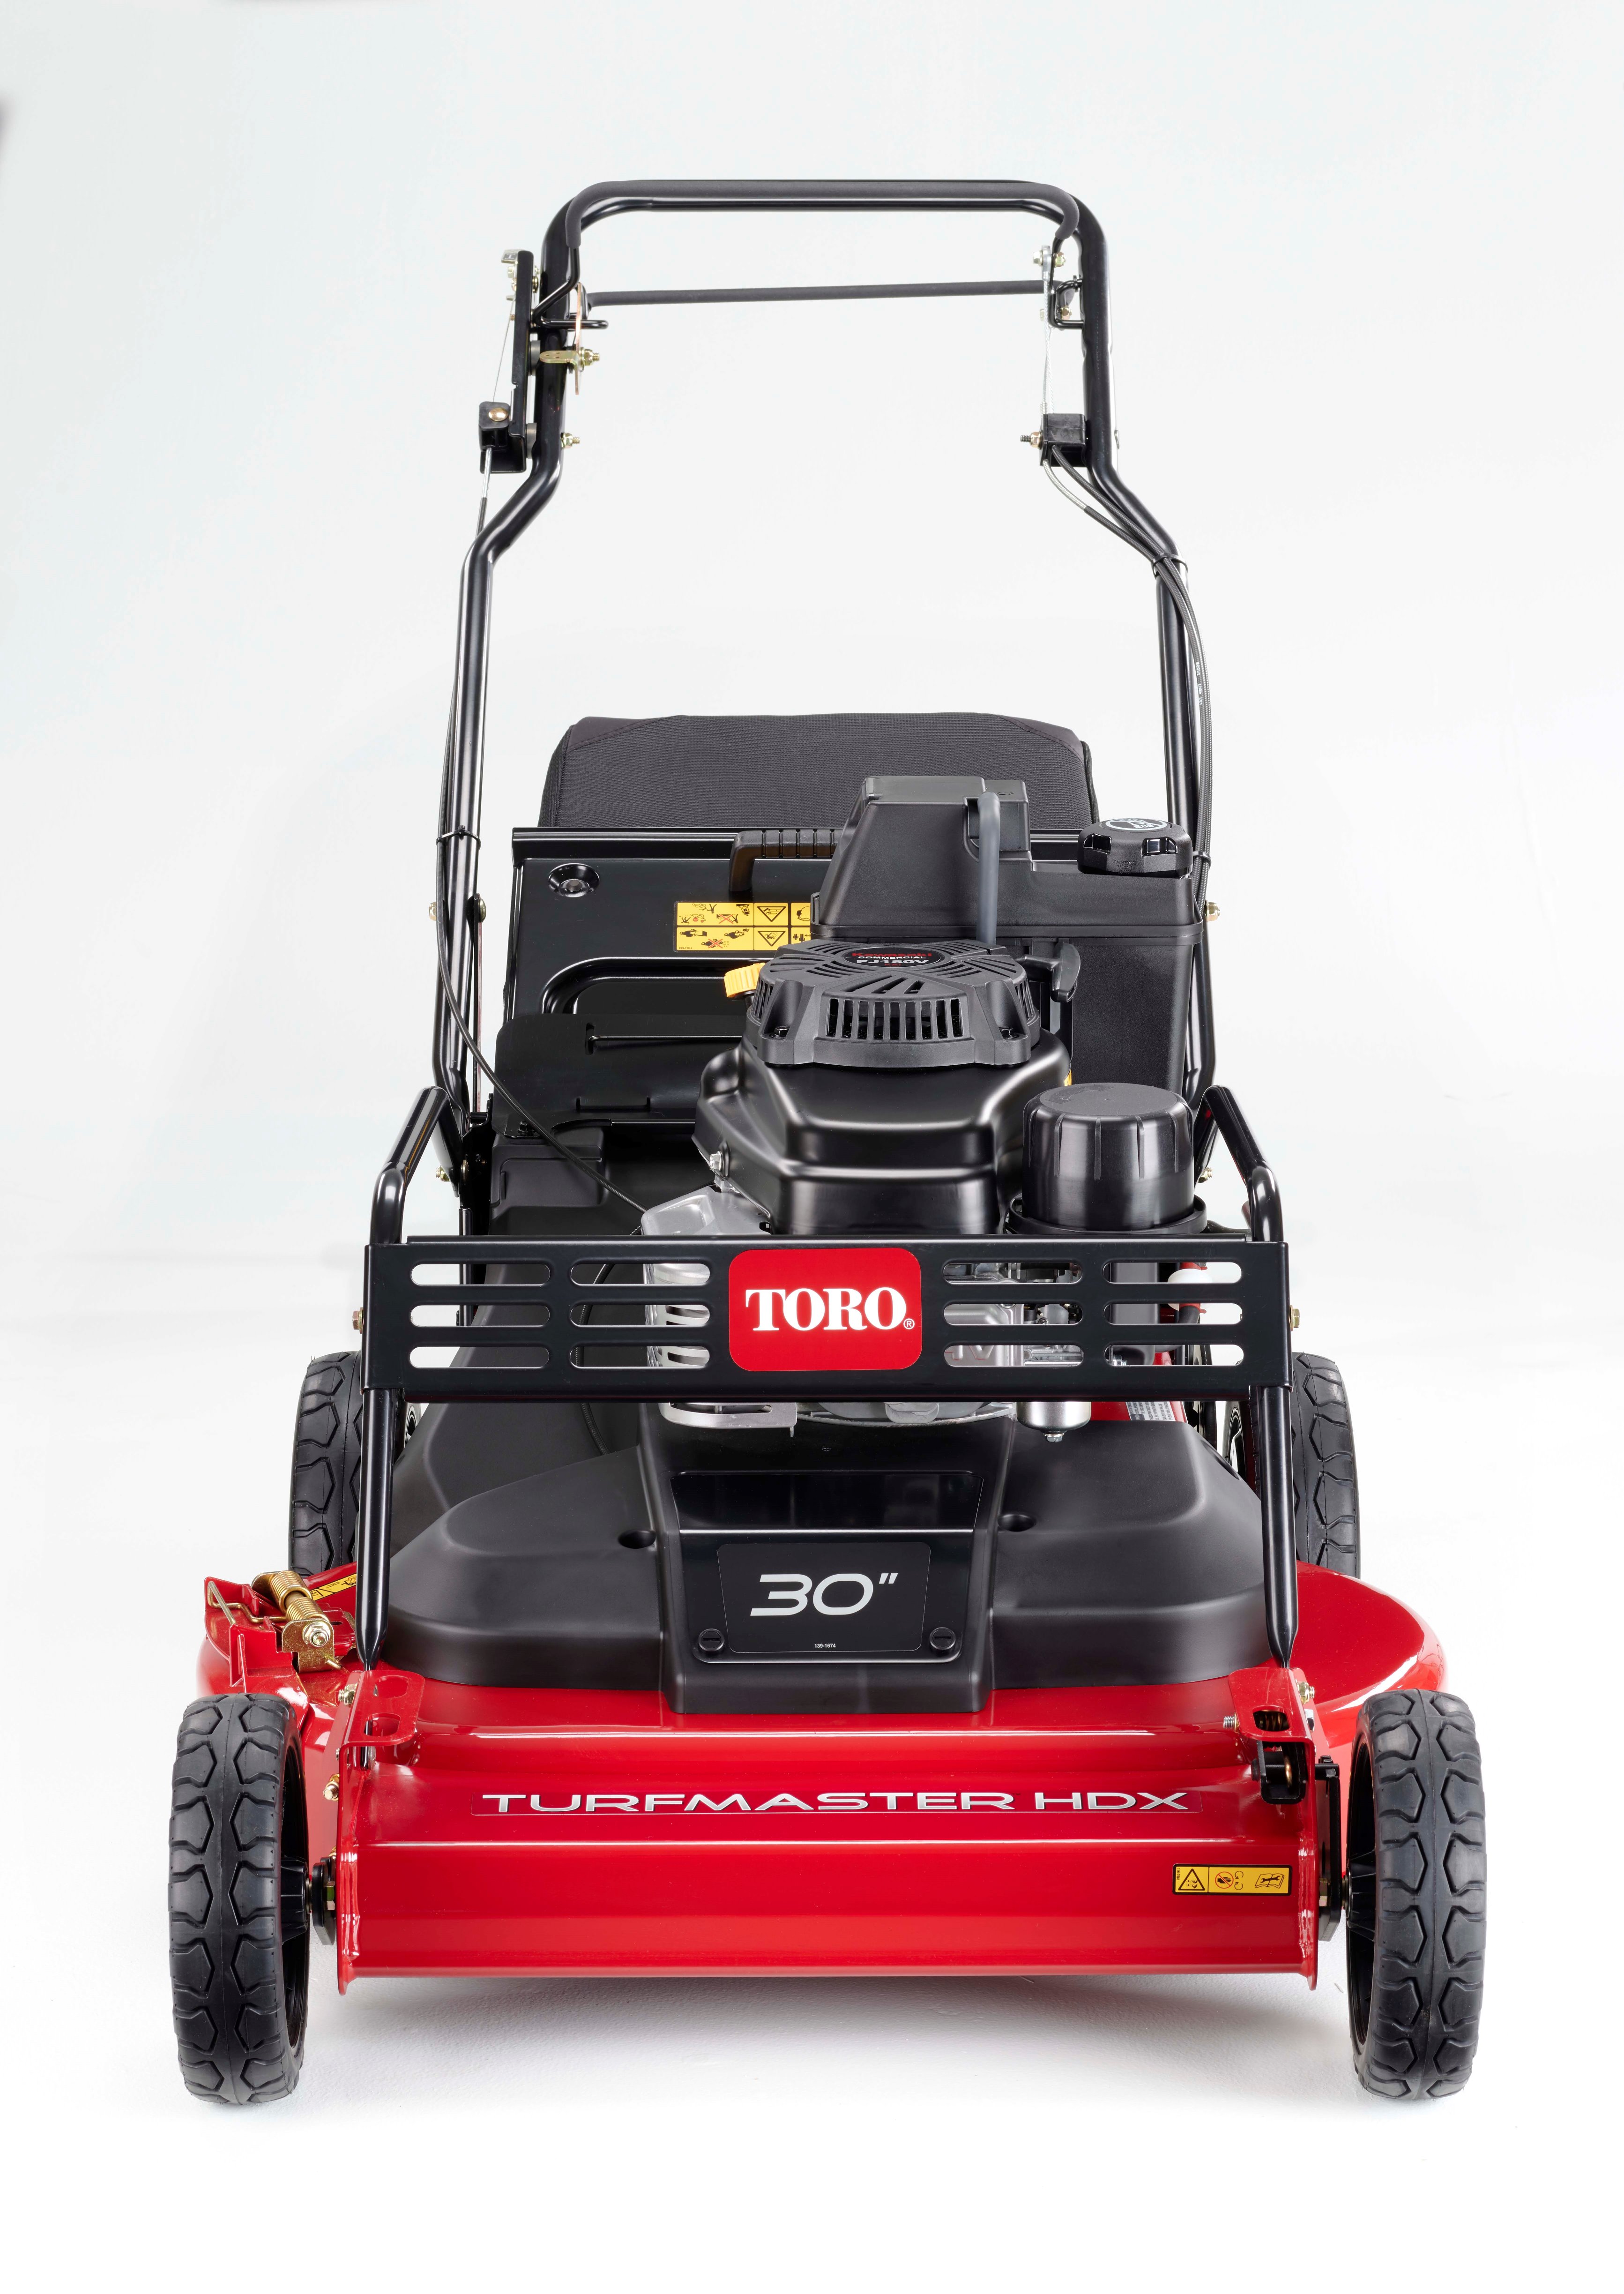 Toro TurfMaster HDX 30” shines in the area of productivity.